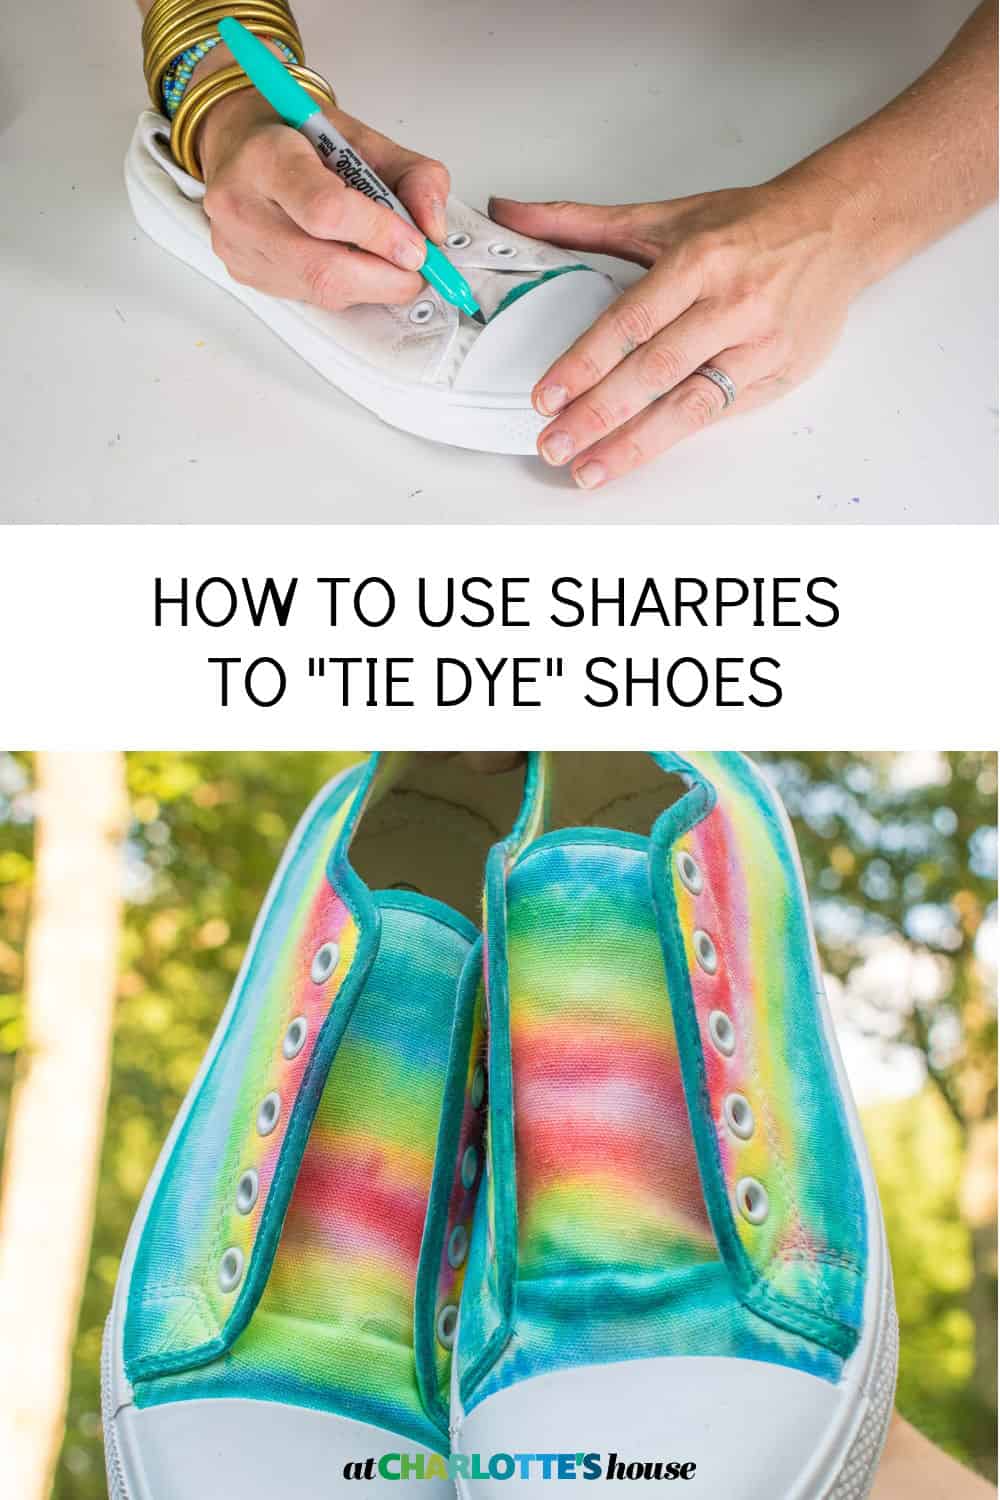 The easy way - how to tie dye shoes - Swoodson Says